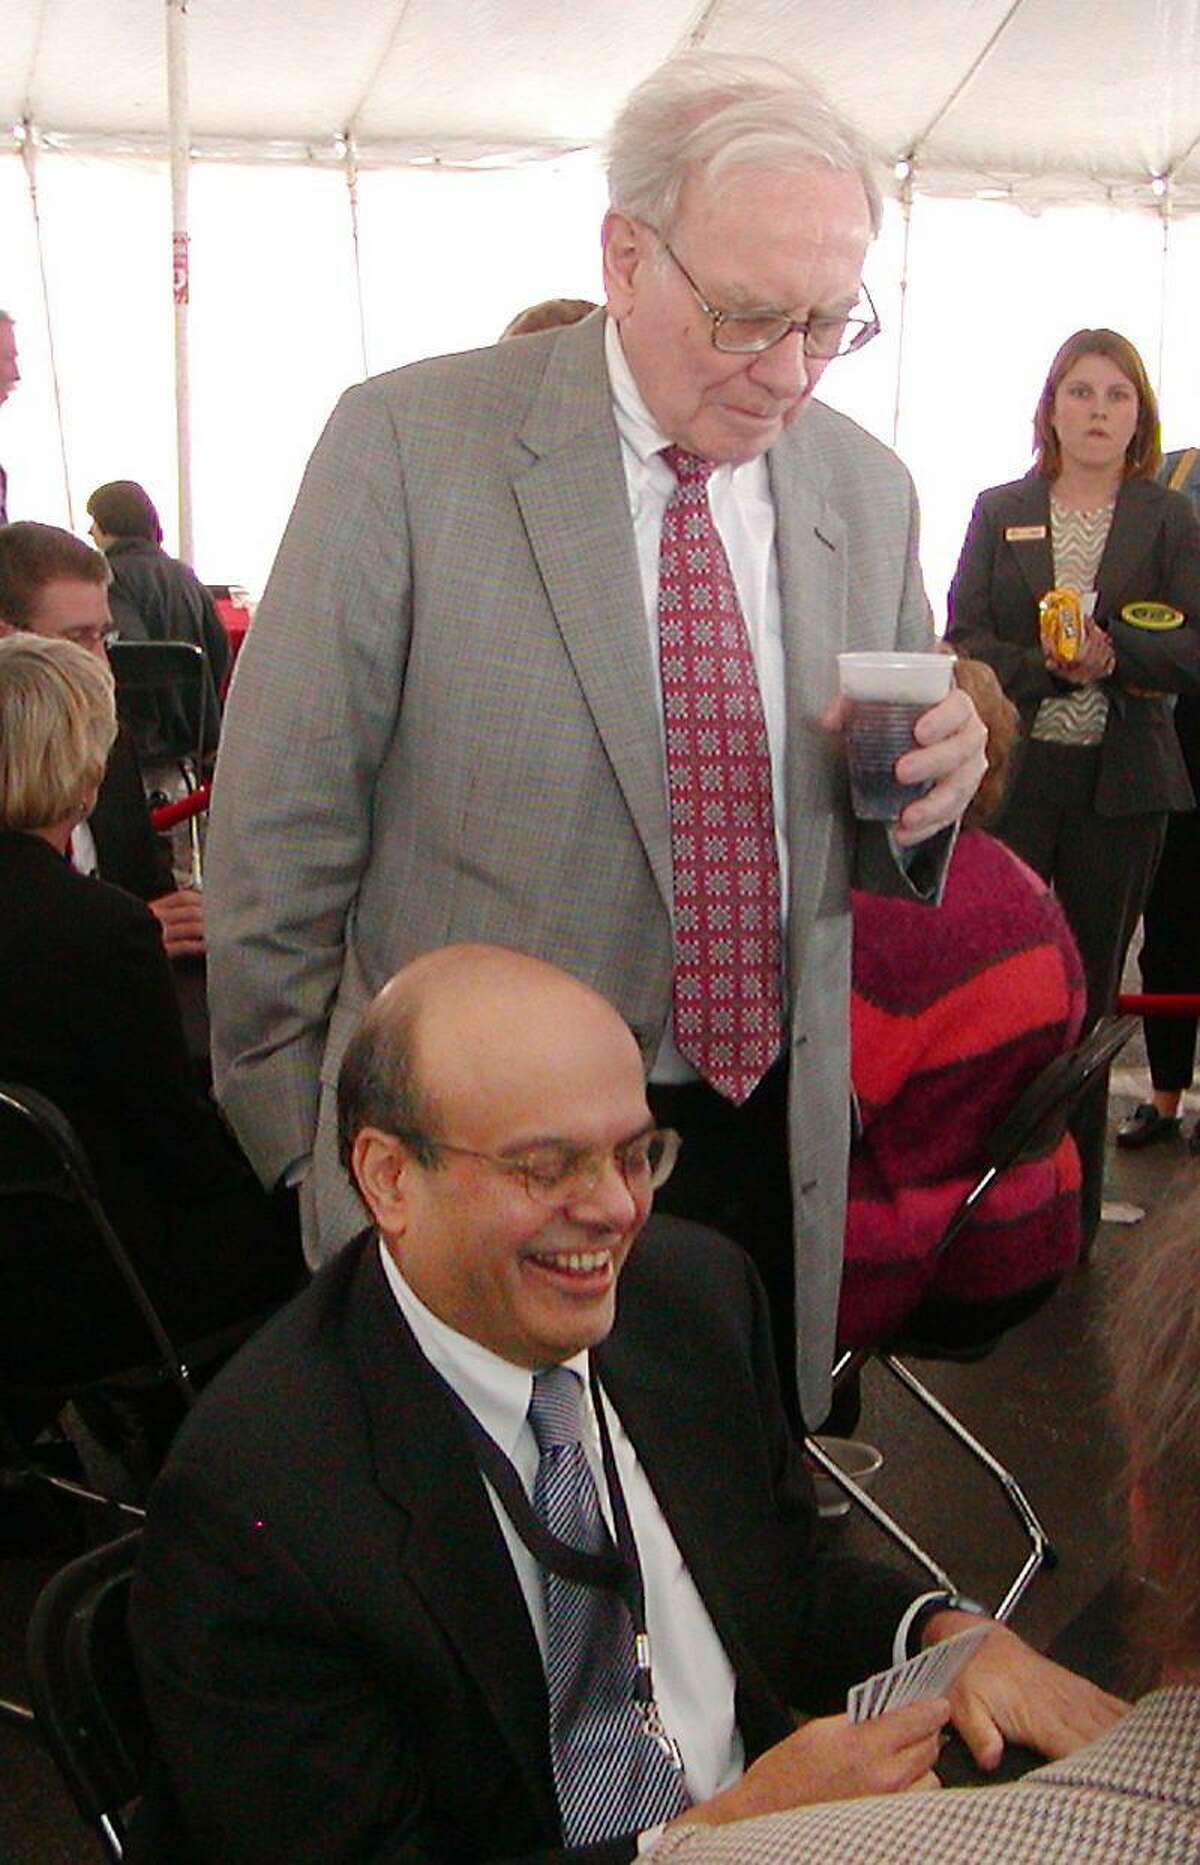 Warren Buffet, chairman and chief executive officer of Berkshire Hathaway Inc., looks over the shoulder of Ajit Jain, head of the reinsurance unit with Berkshire Hathaway Inc.,